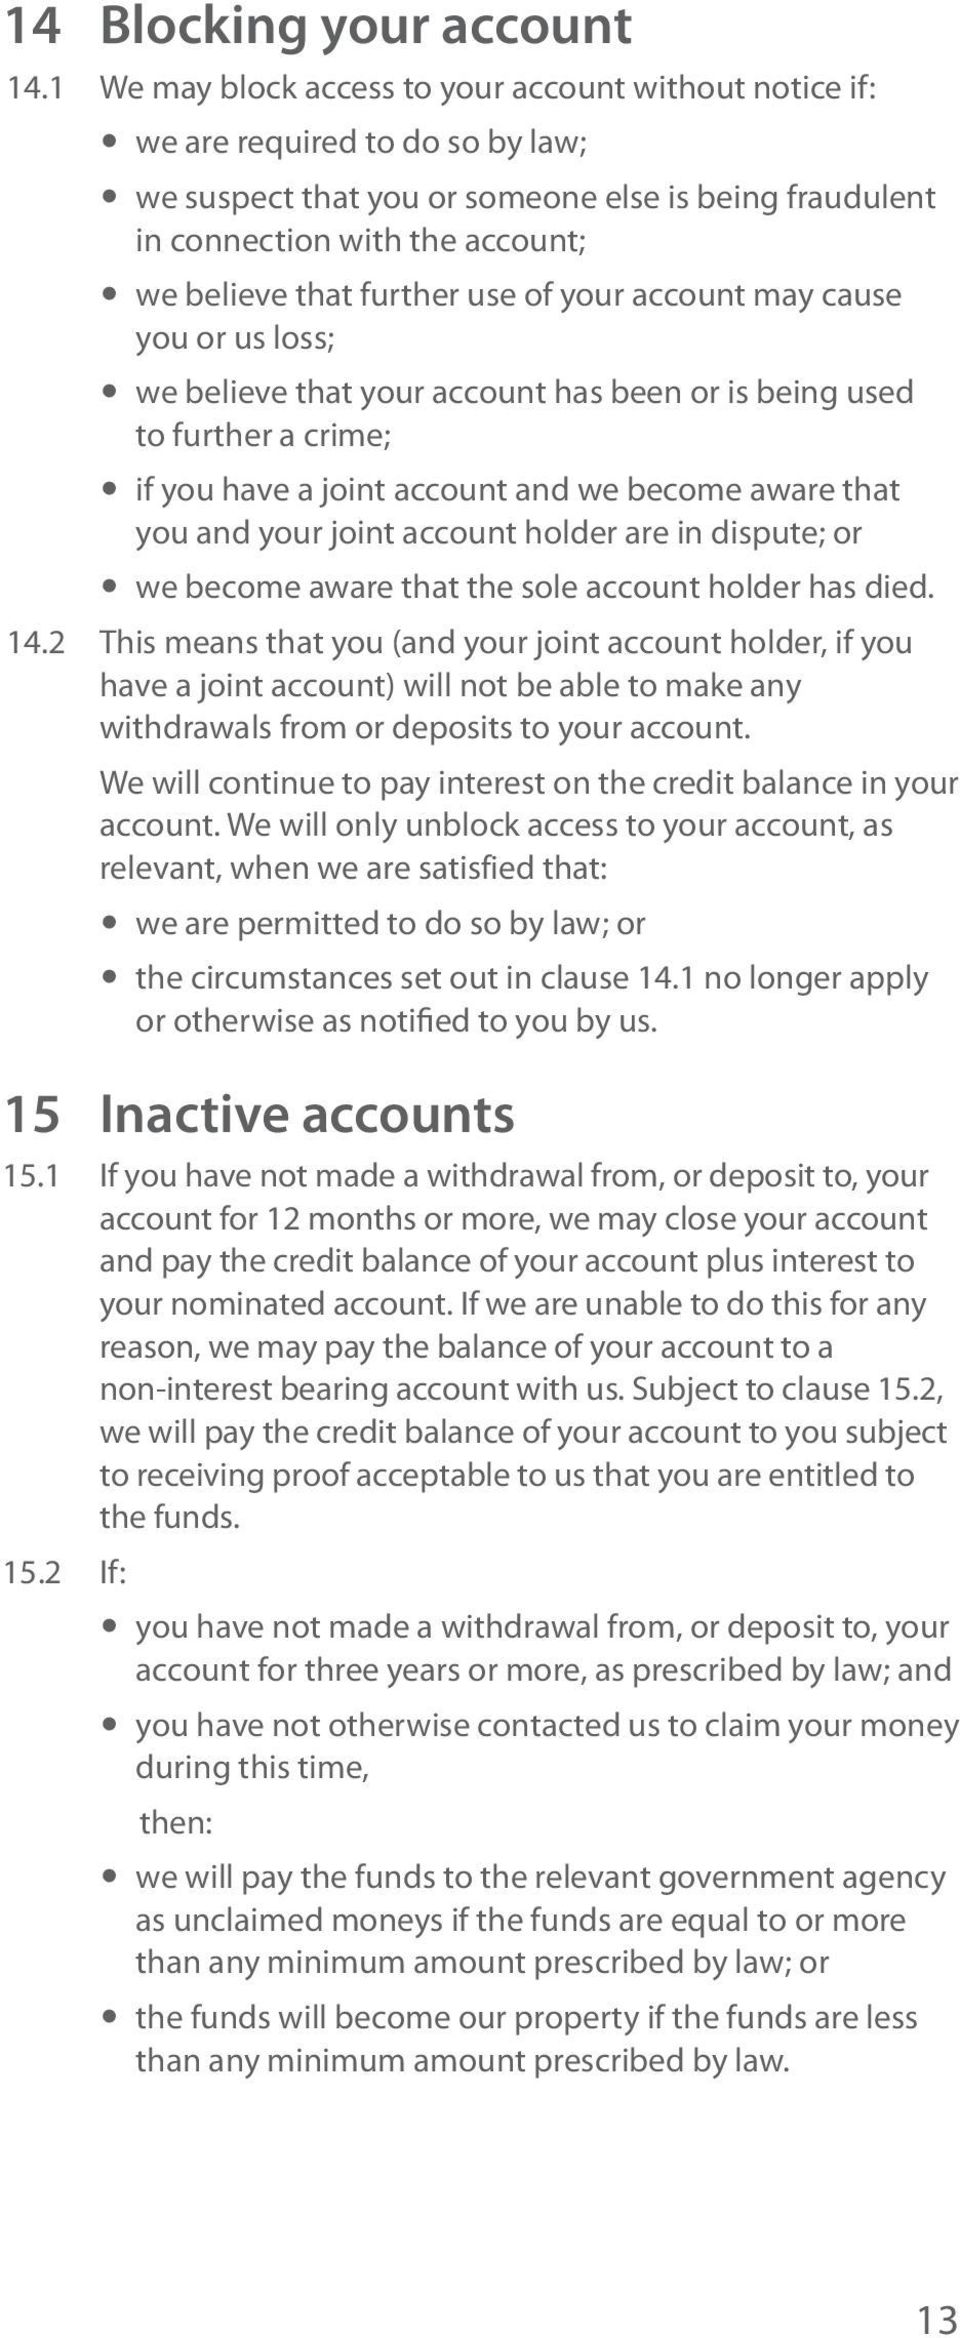 further use of your account may cause you or us loss; y we believe that your account has been or is being used to further a crime; y if you have a joint account and we become aware that you and your